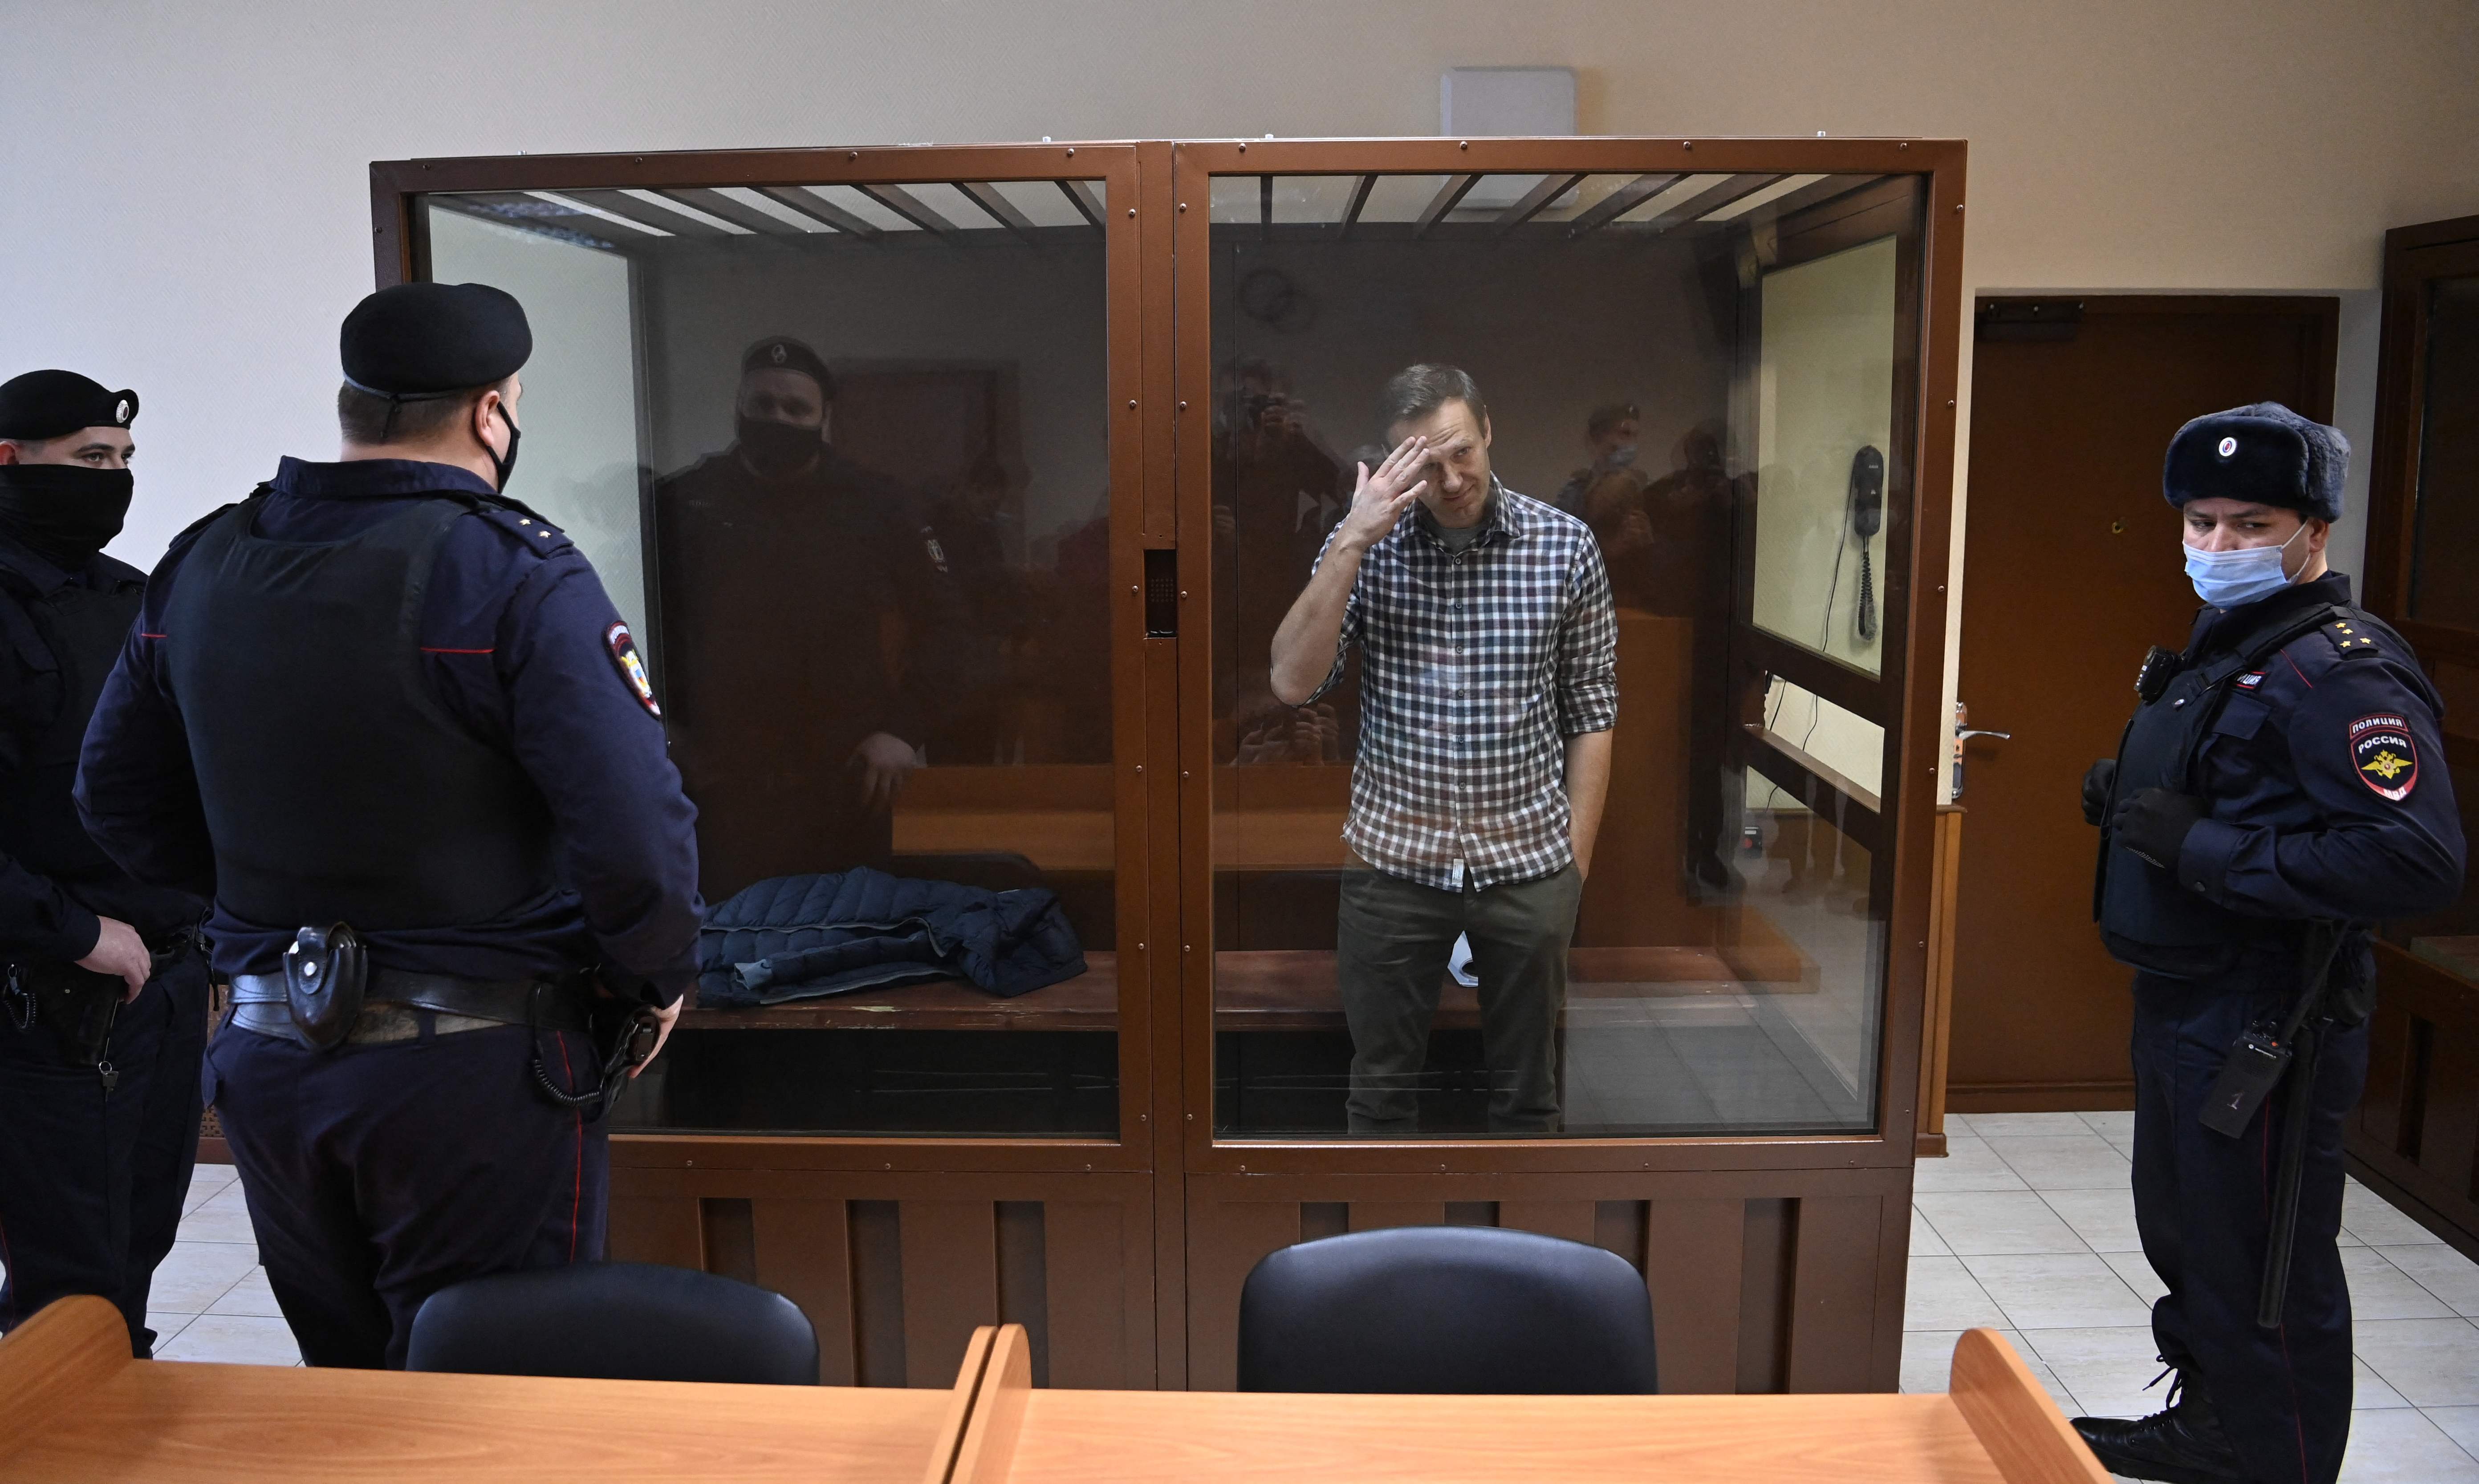 The Russian opposition leader stands inside a glass cell during a court hearing at the Babushkinsky district court in Moscow in February